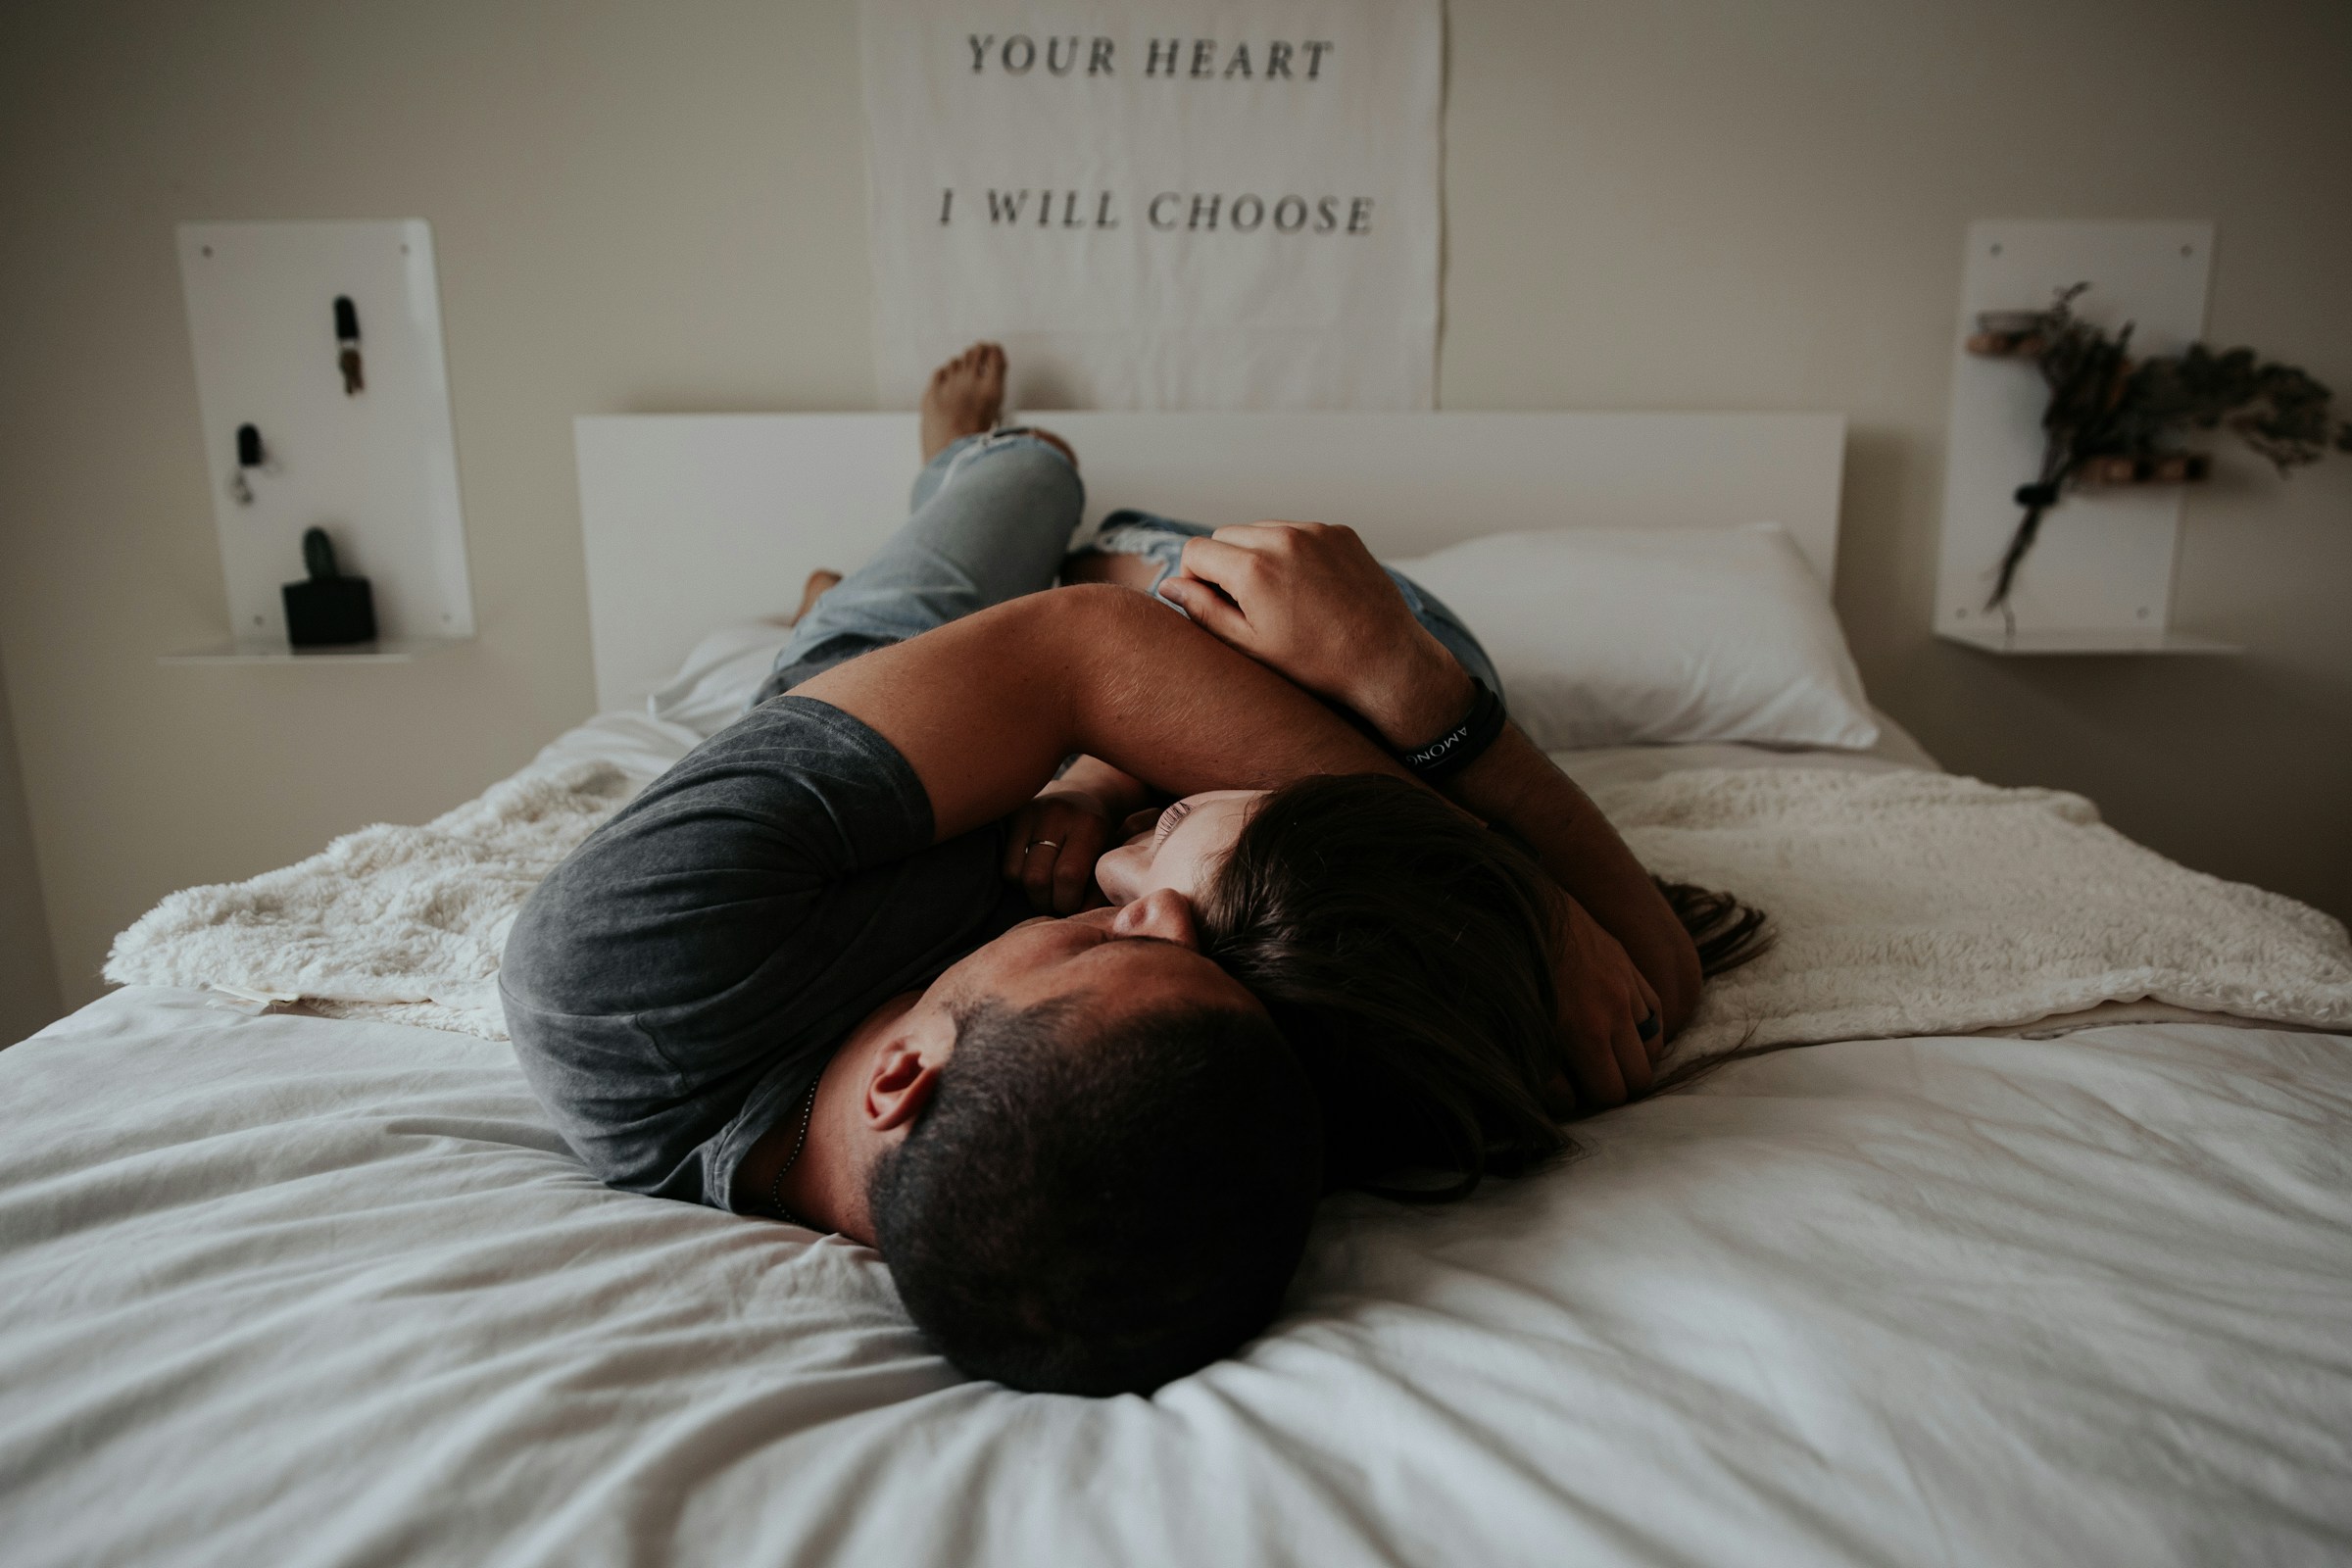 A couple cuddling on a bed | Source: Unsplash